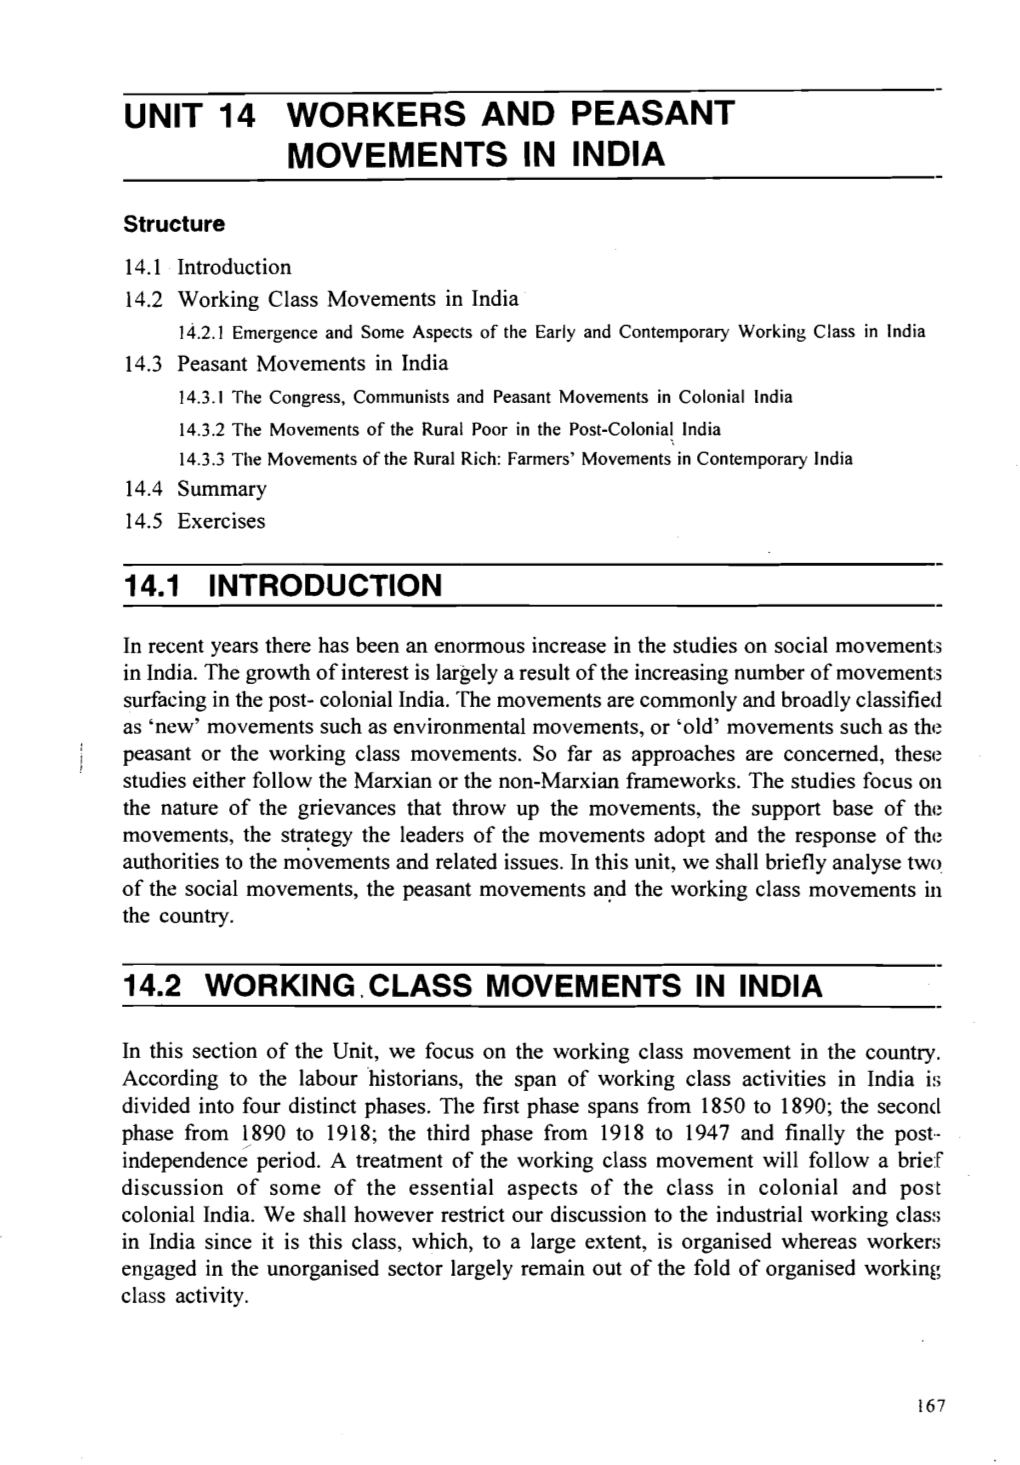 Unit 14 Workers and Peasant Movements in India